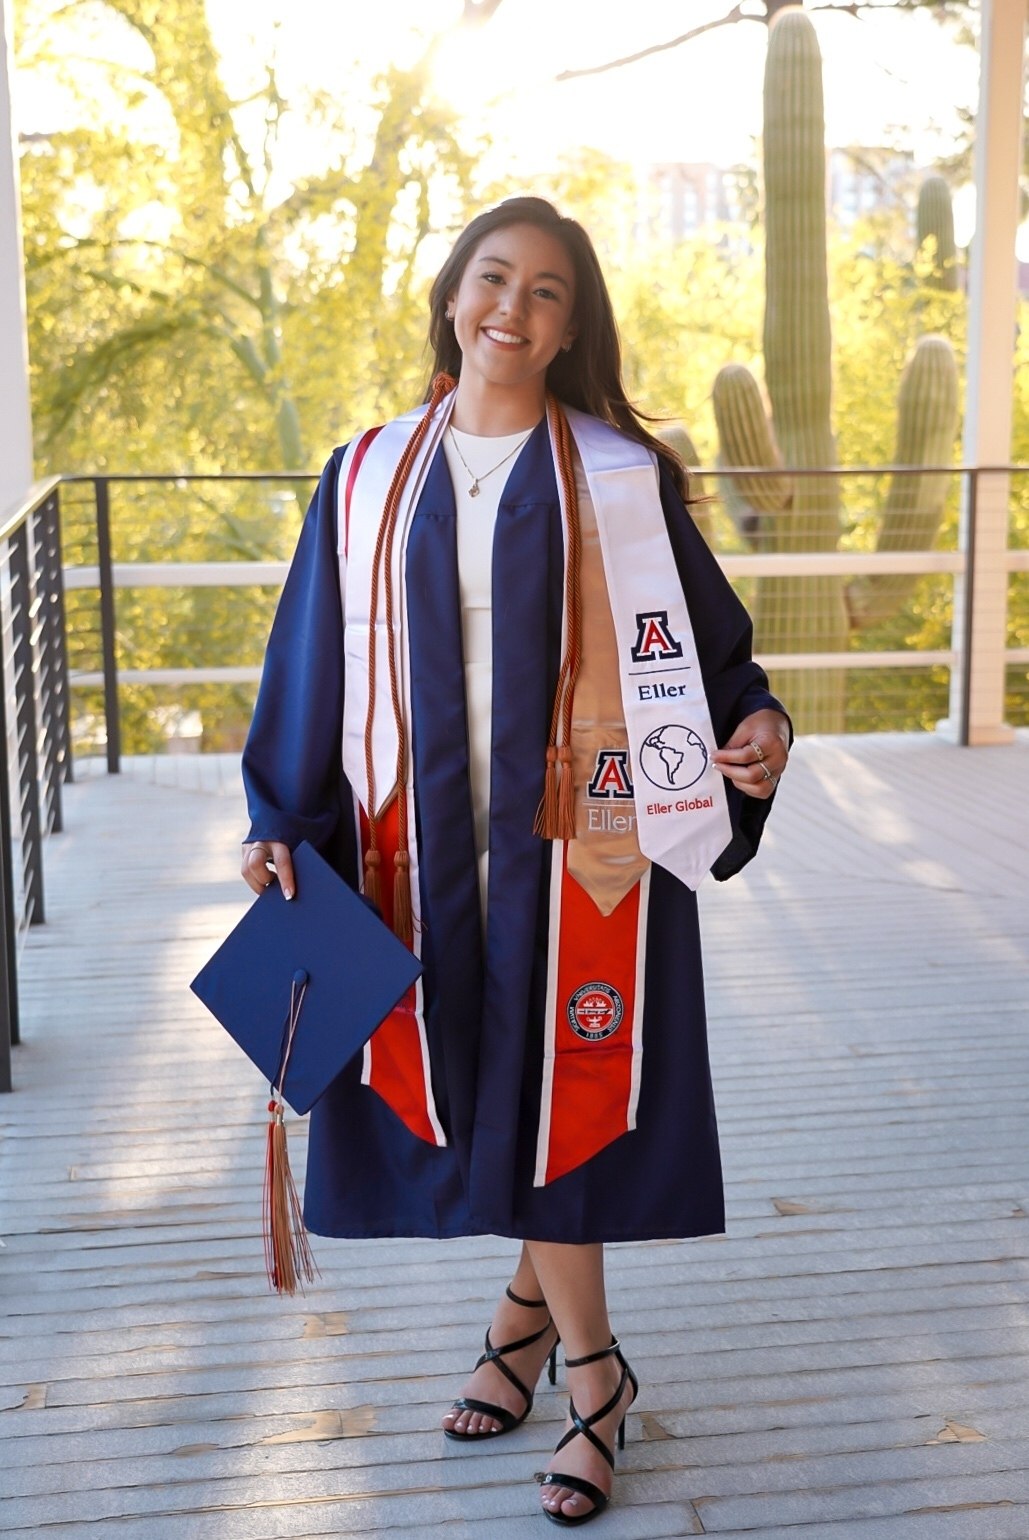 Smiling young woman wearing blue graduation gown, holding cap in one hand and Eller College of Management stole in the other